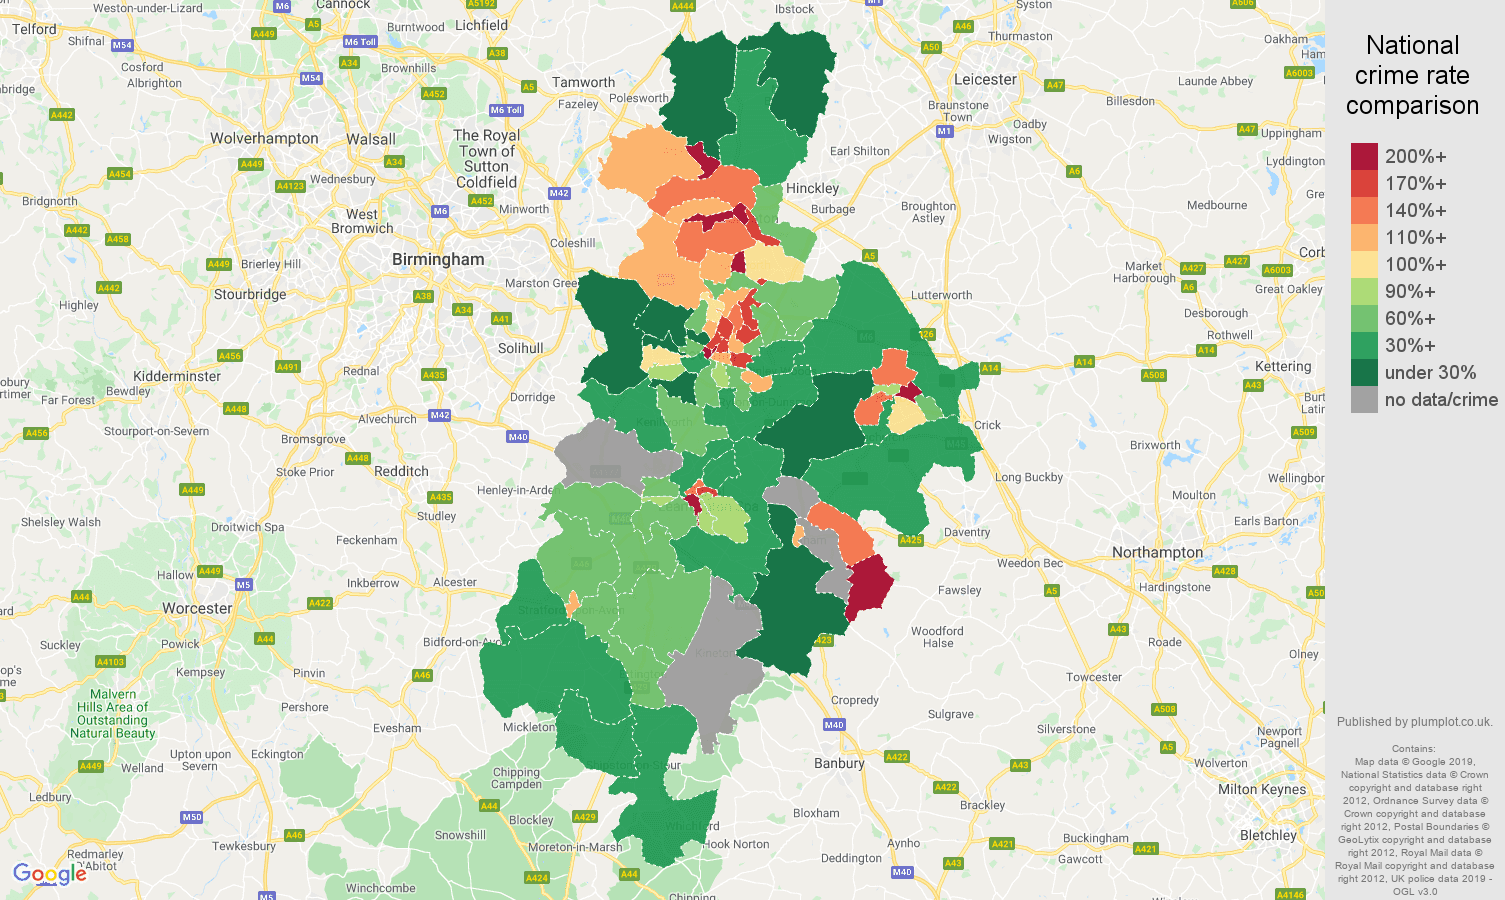 Coventry possession of weapons crime rate comparison map